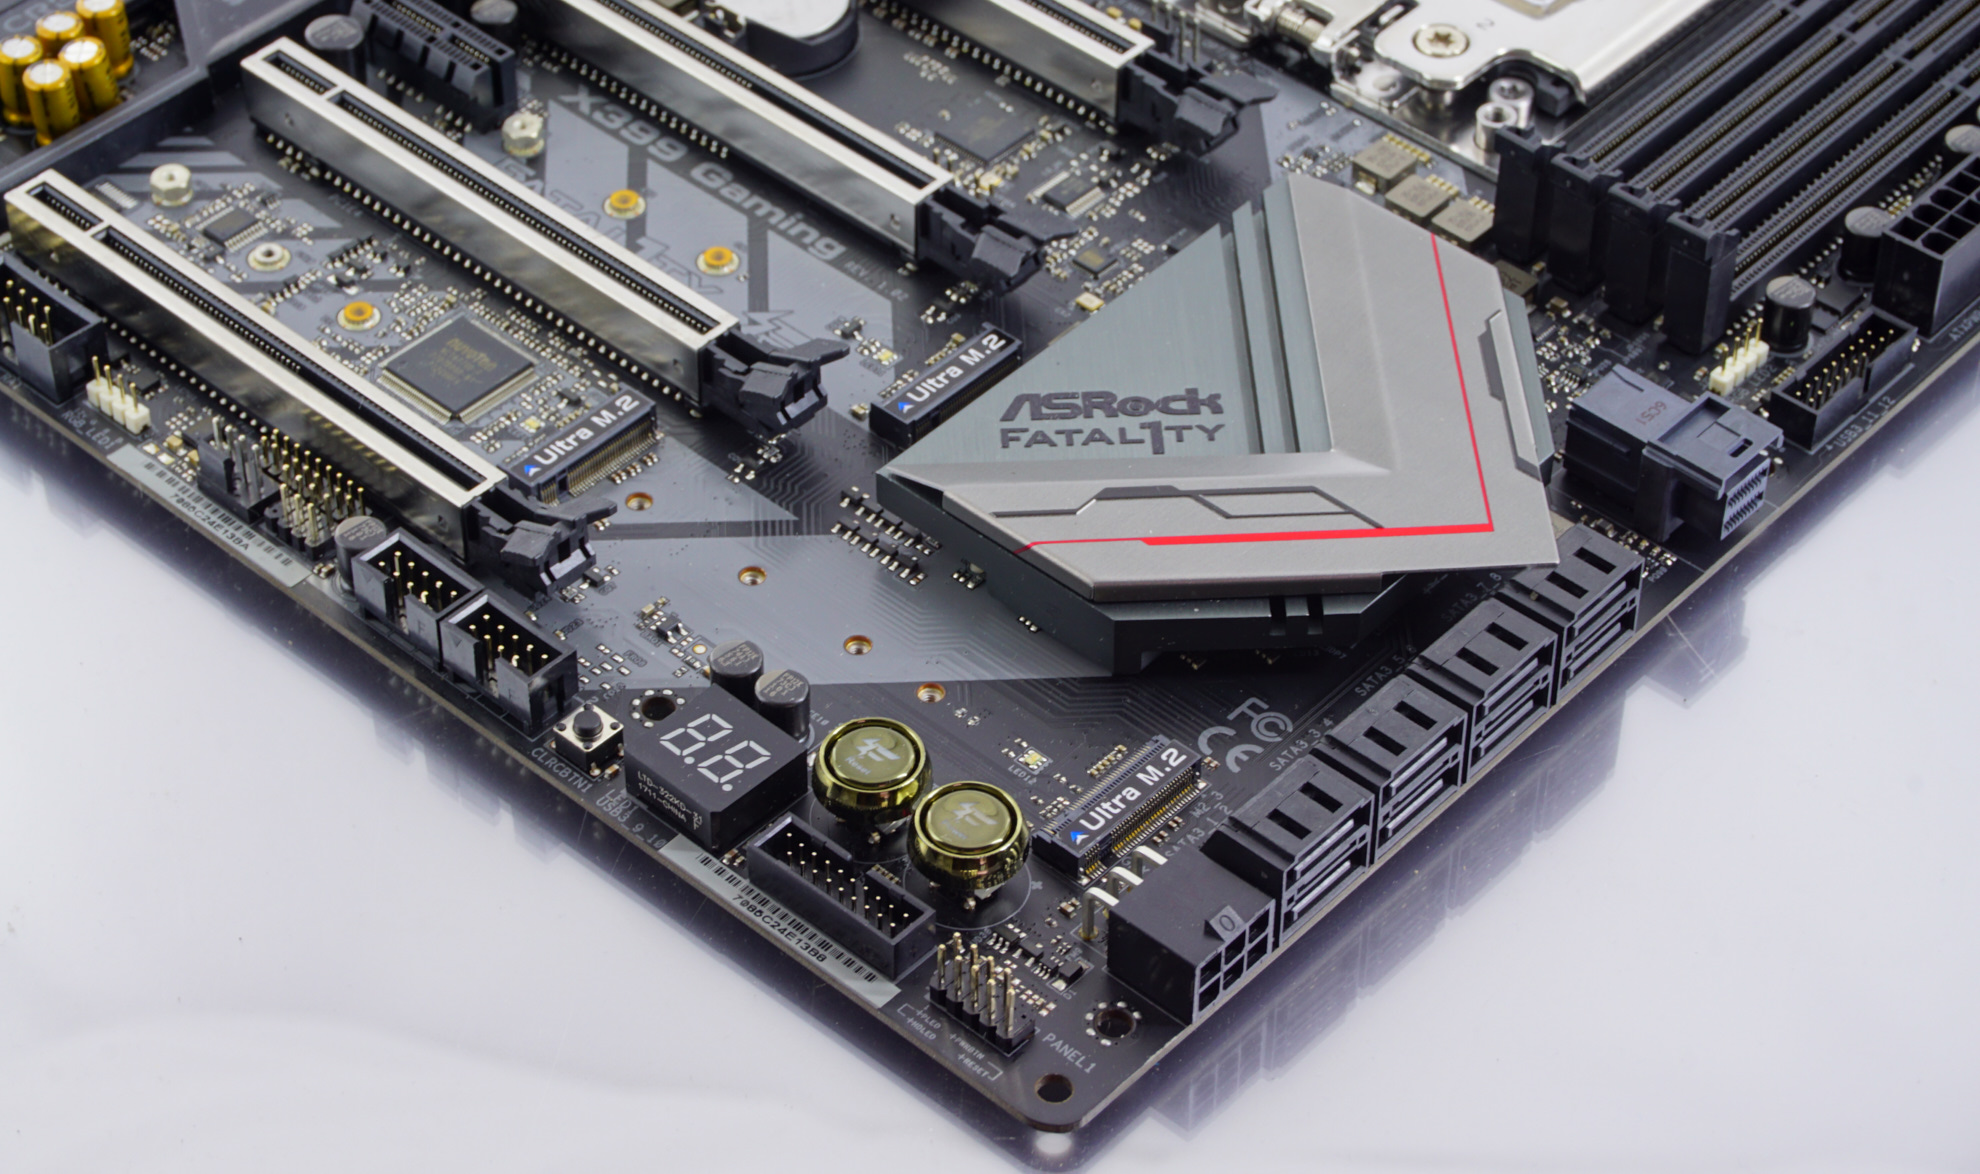 Visual Inspection - The ASRock X399 Professional Gaming Motherboard